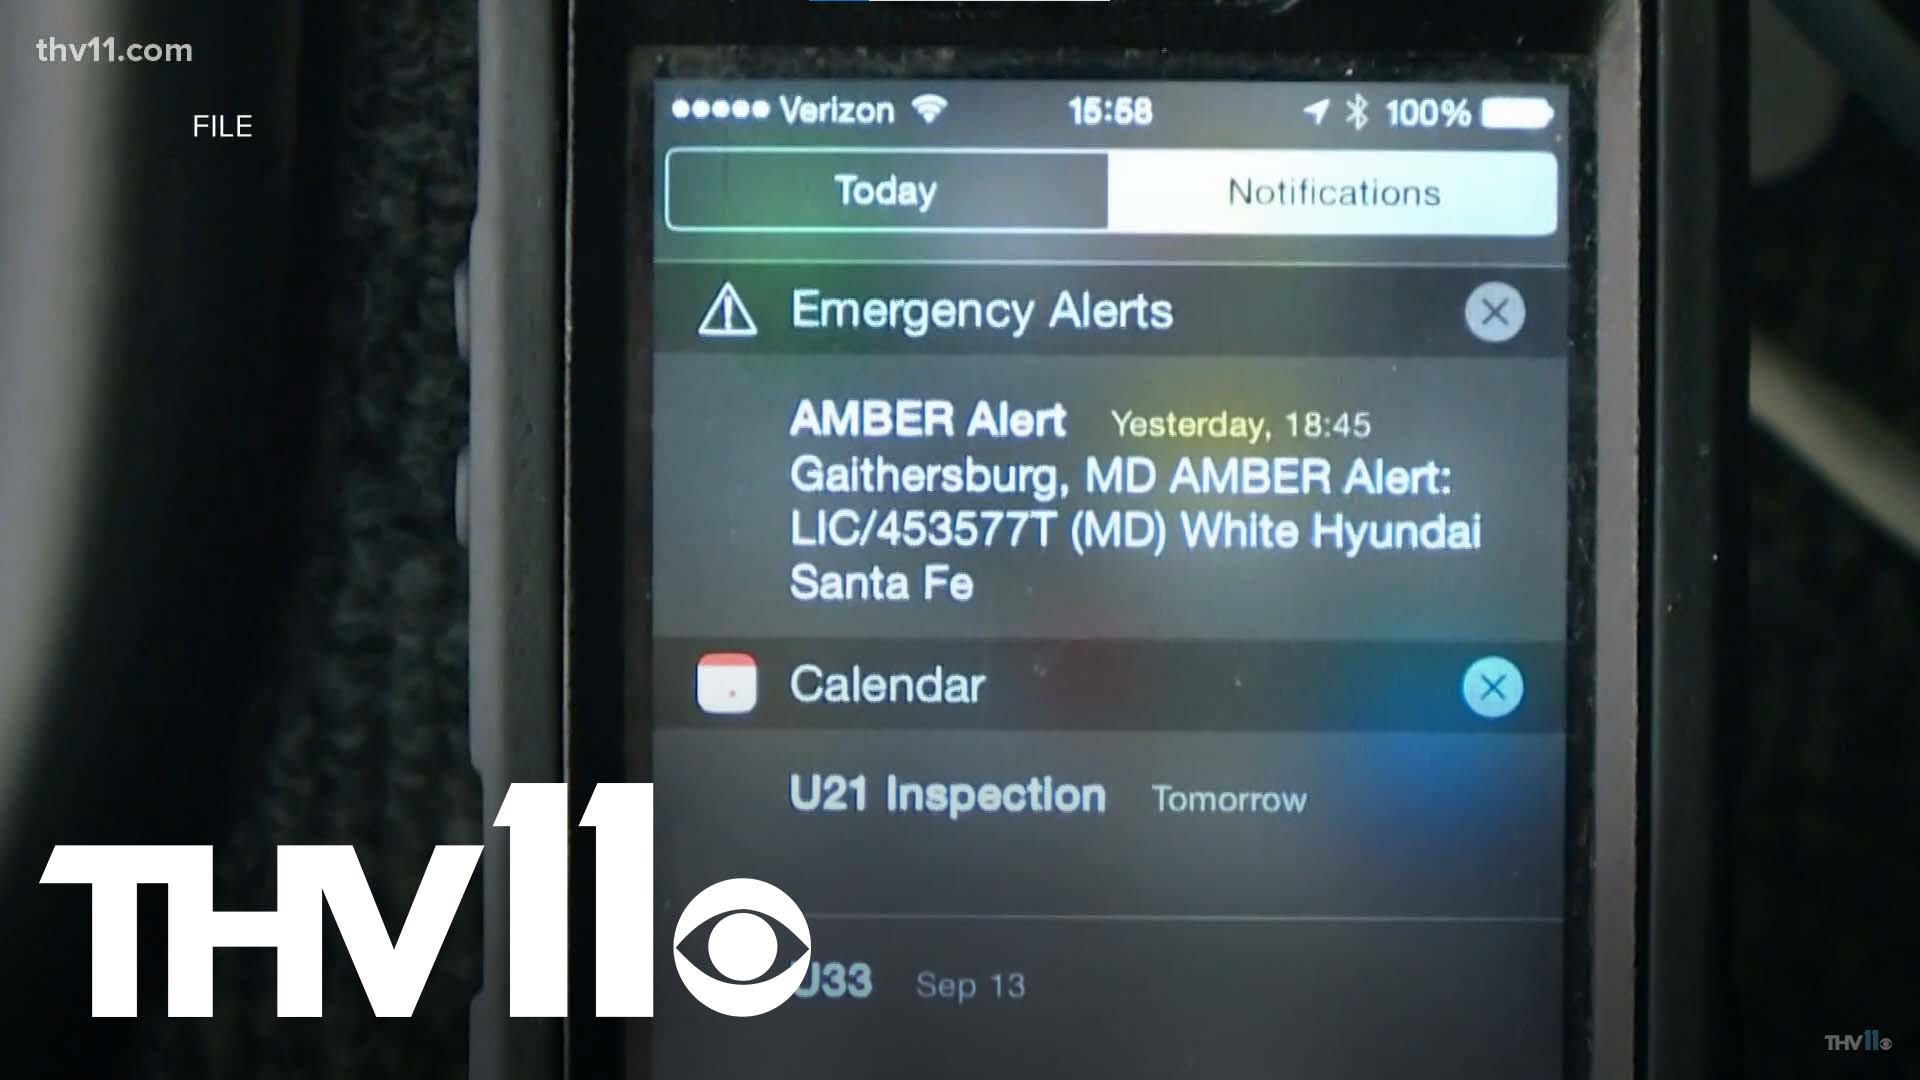 For Amber Alerts in Arkansas, time constraints play a role in how and why the alert gets issued. Here's an inside into what goes into an Amber Alert.